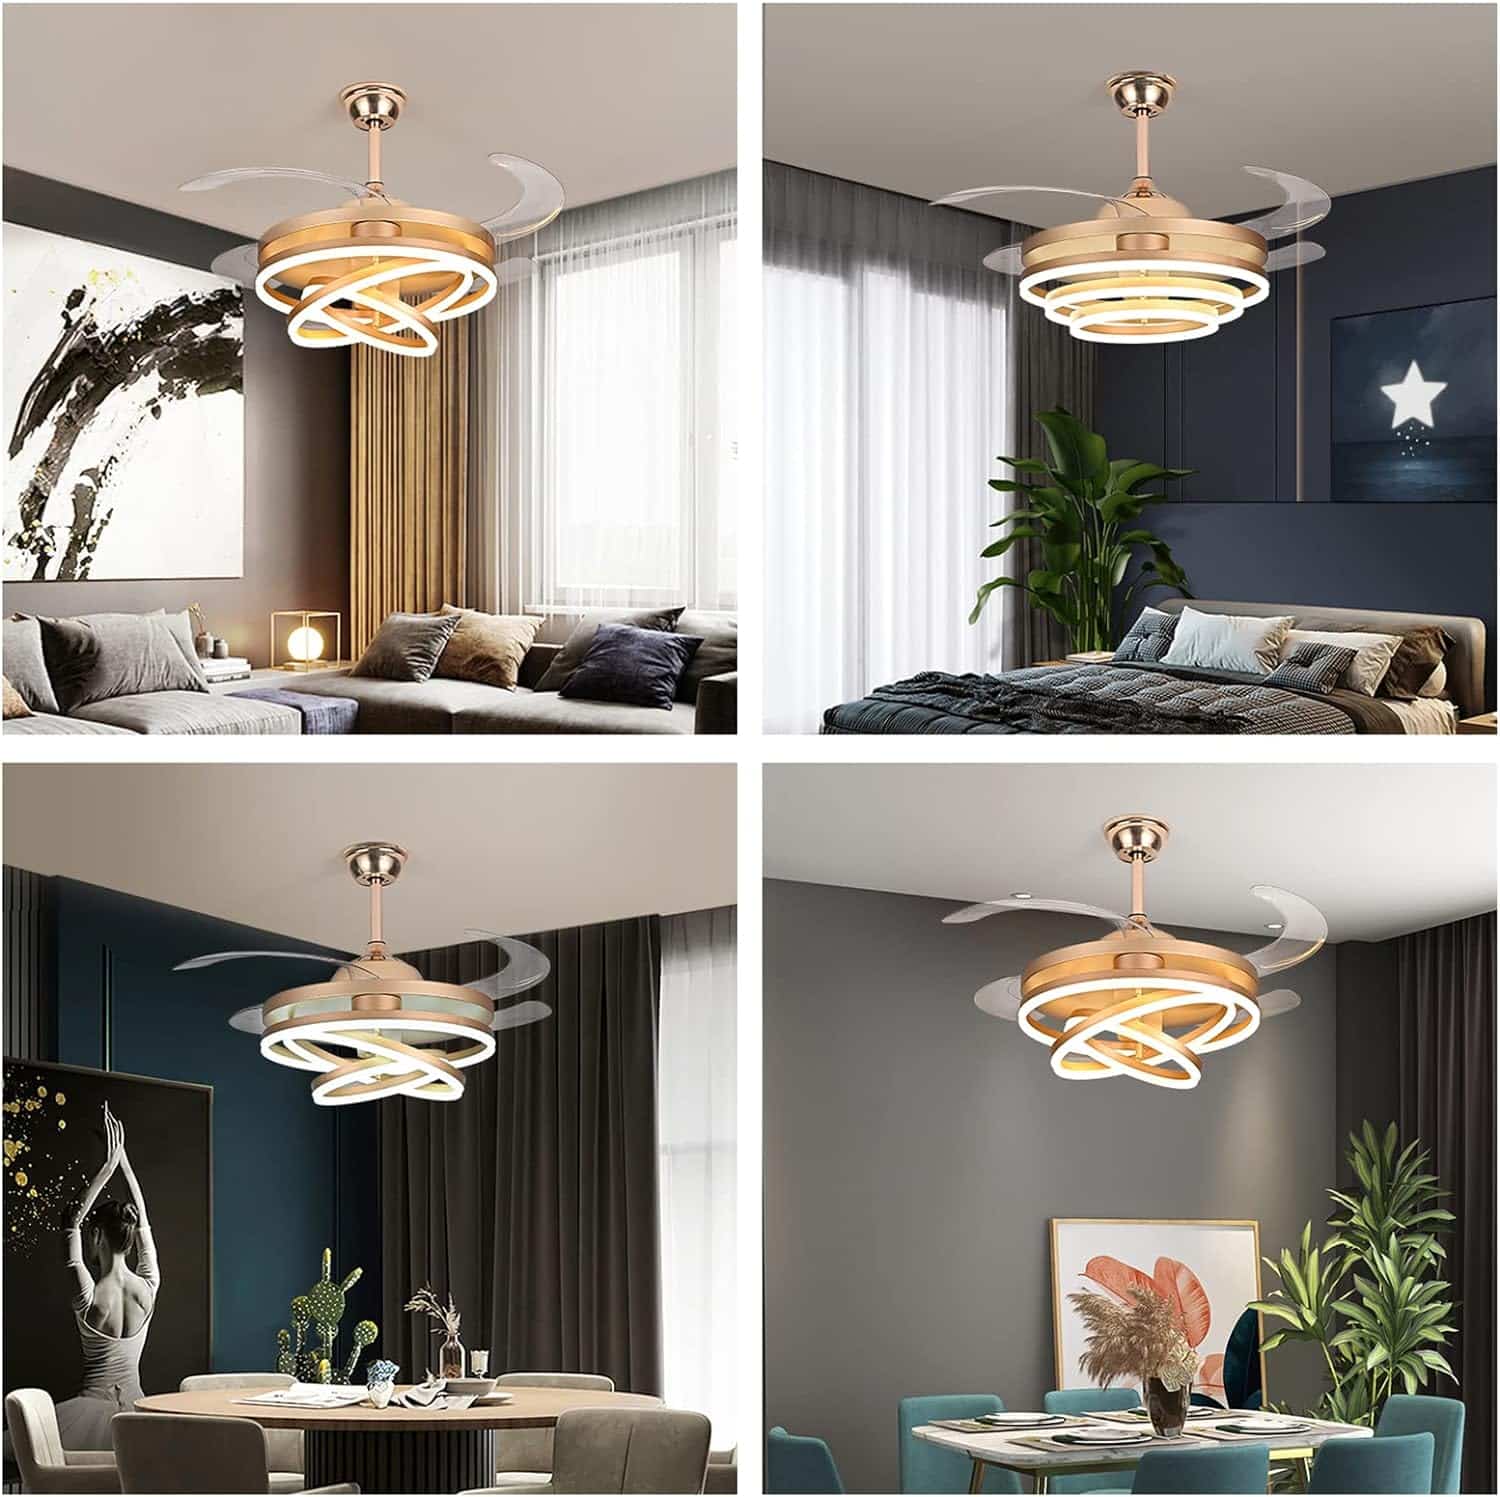 42 Invisible Ceiling Fan Chandelier Light,Modern DIY Ceiling Fan Light Remote Control 4 Retractable ABS Blades for Bedroom Living Dining Room Decoration (42, Gold)